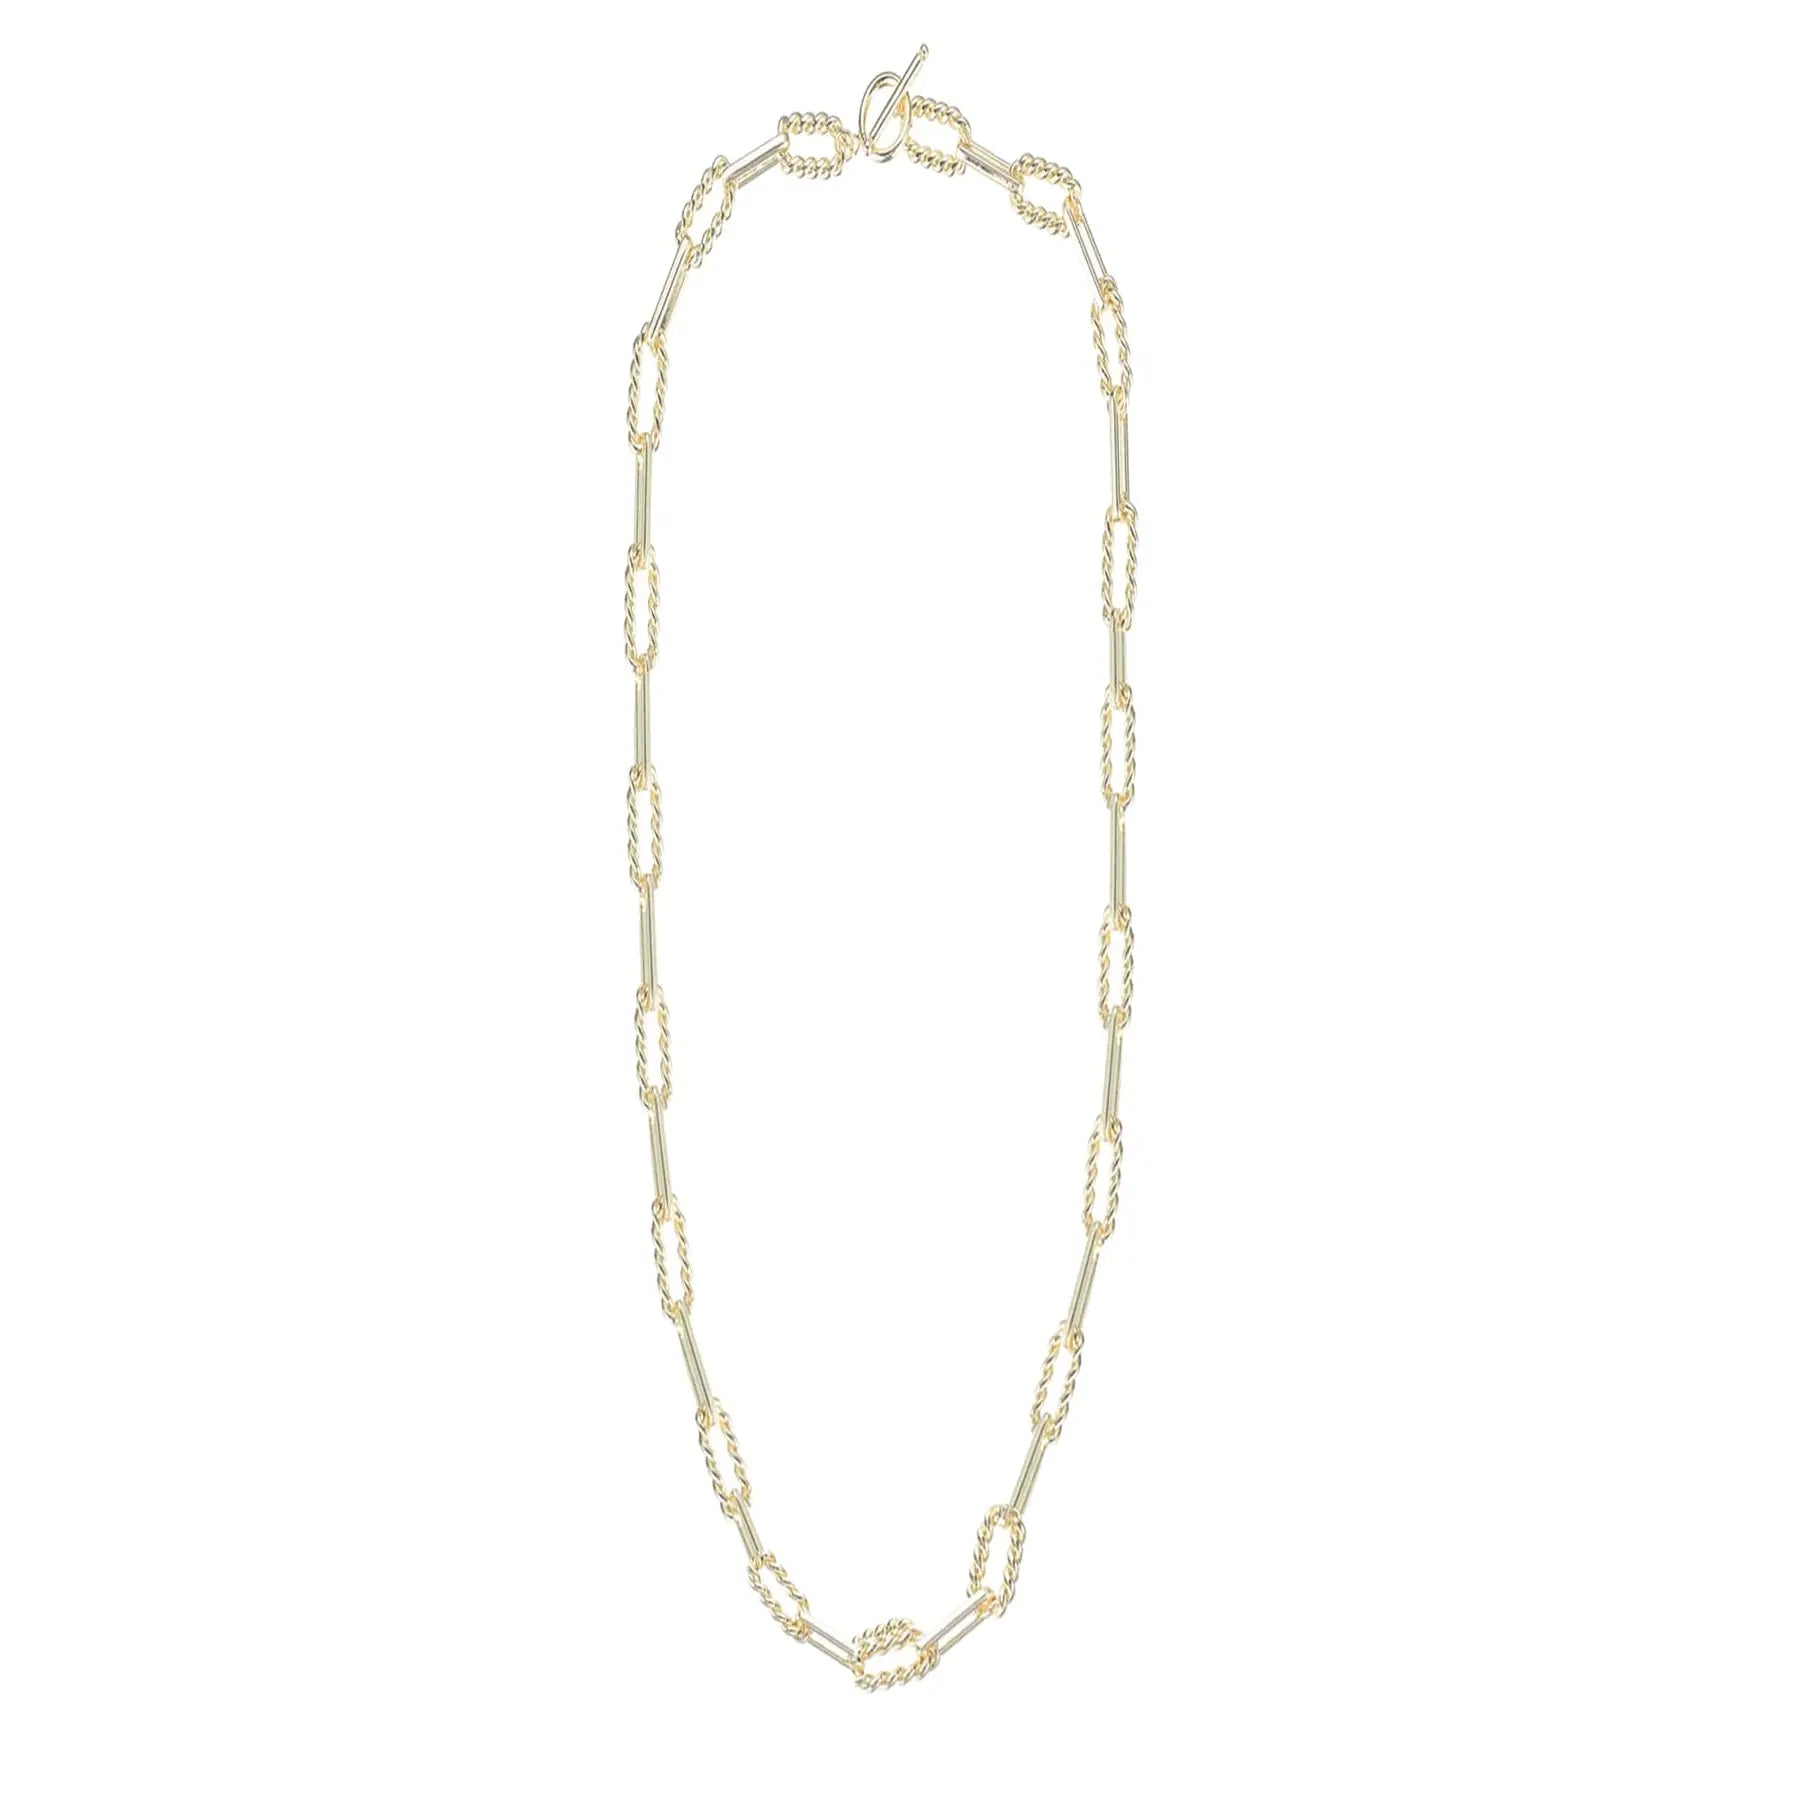 Natalie Wood - She's Spicy Mini Chain Link Necklaces in Gold-Natalie Wood-July & June Women's Fashion Boutique Located in San Antonio, Texas